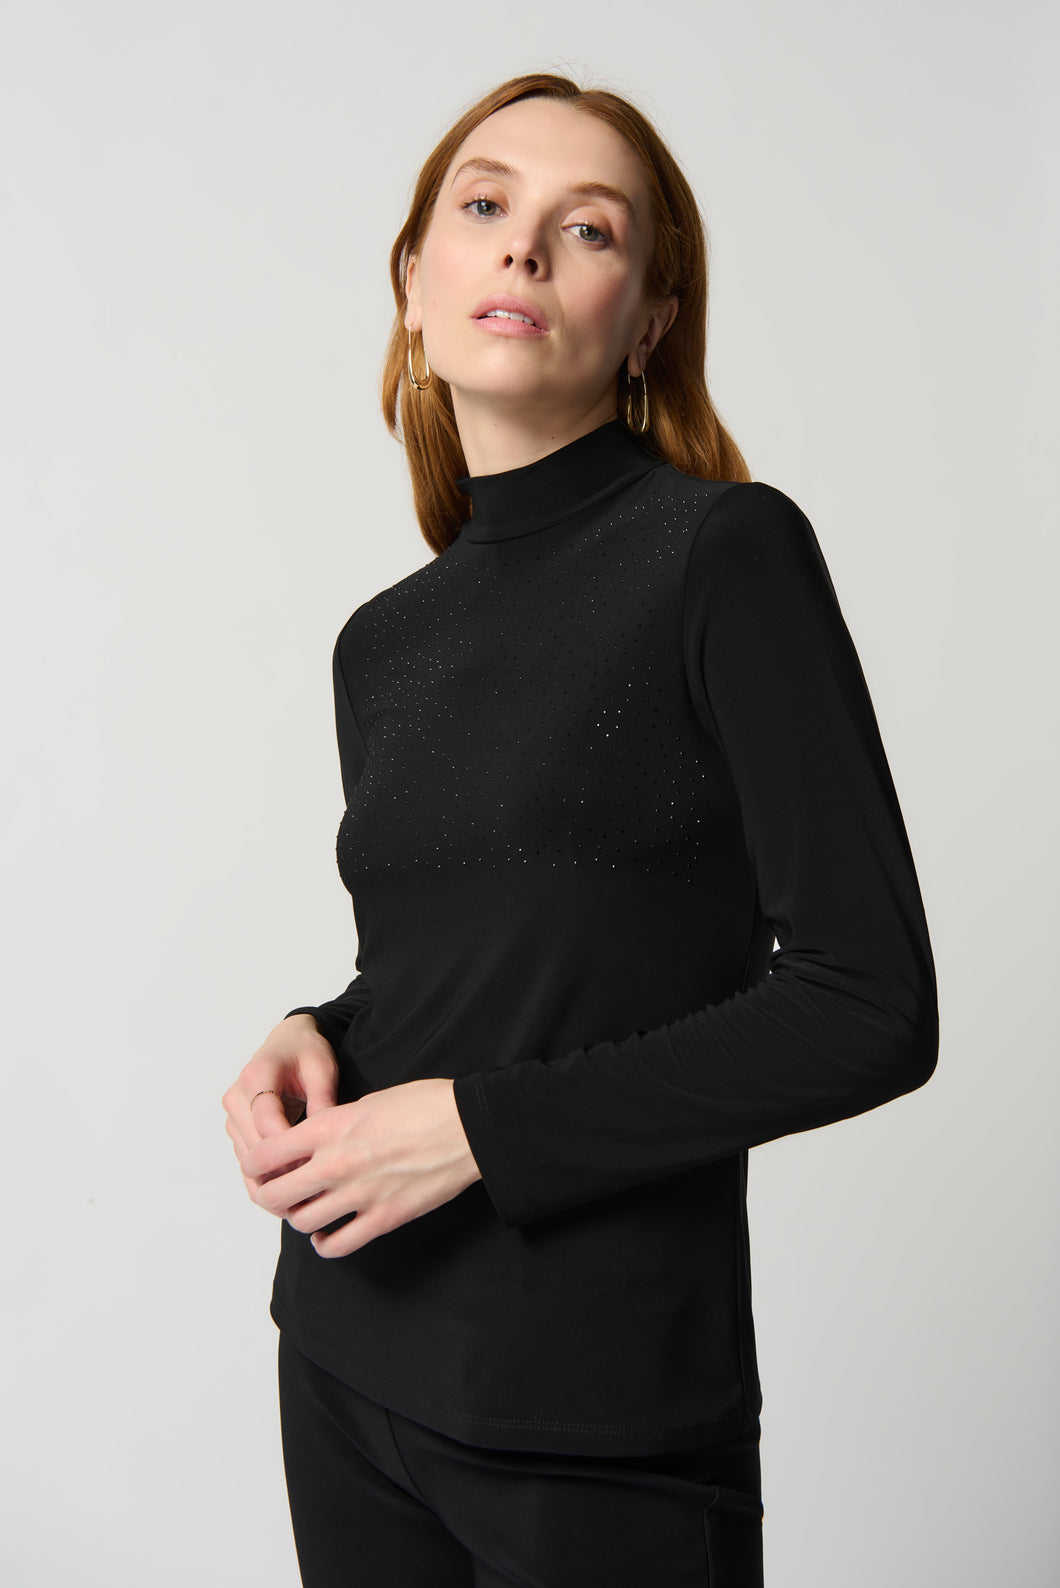 Lightweight and soft on the skin, this figure-flattering top is perfect for pairing with everything in your closet. Featuring long sleeves, a chic mock neck and crystal appliqué, this top provides luxurious comfort while offering an iconic silhouette and French flair.  Color- Black. Silky knit fabric. Mock neck Long sleeves. Crystal appliqué at the front. Unlined. Fabric - 96% Polyester. 4% Spandex.